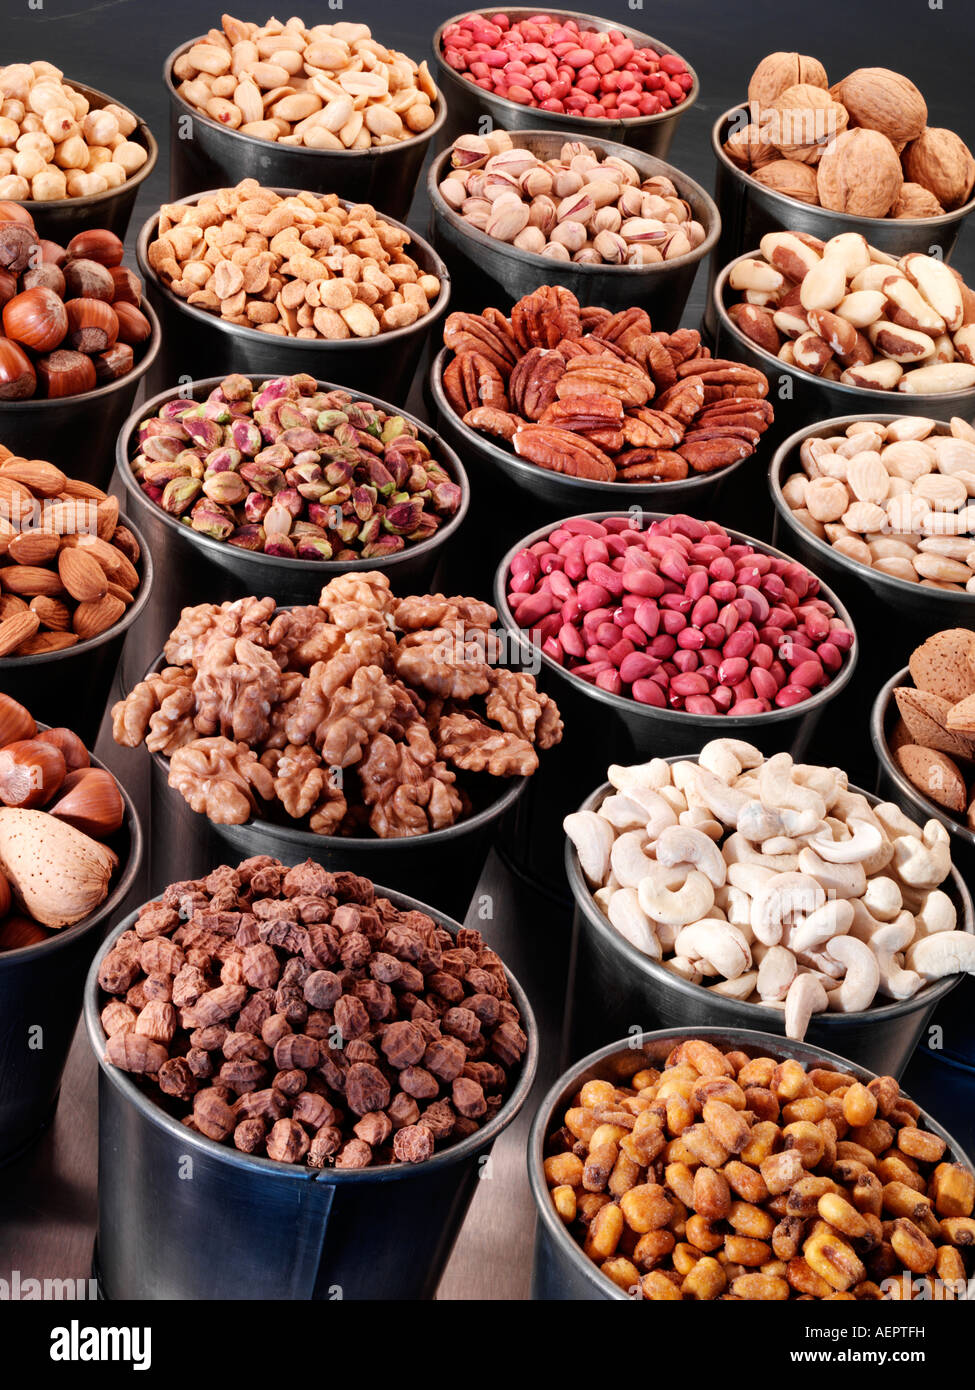 SELECTION OF NUTS Stock Photo